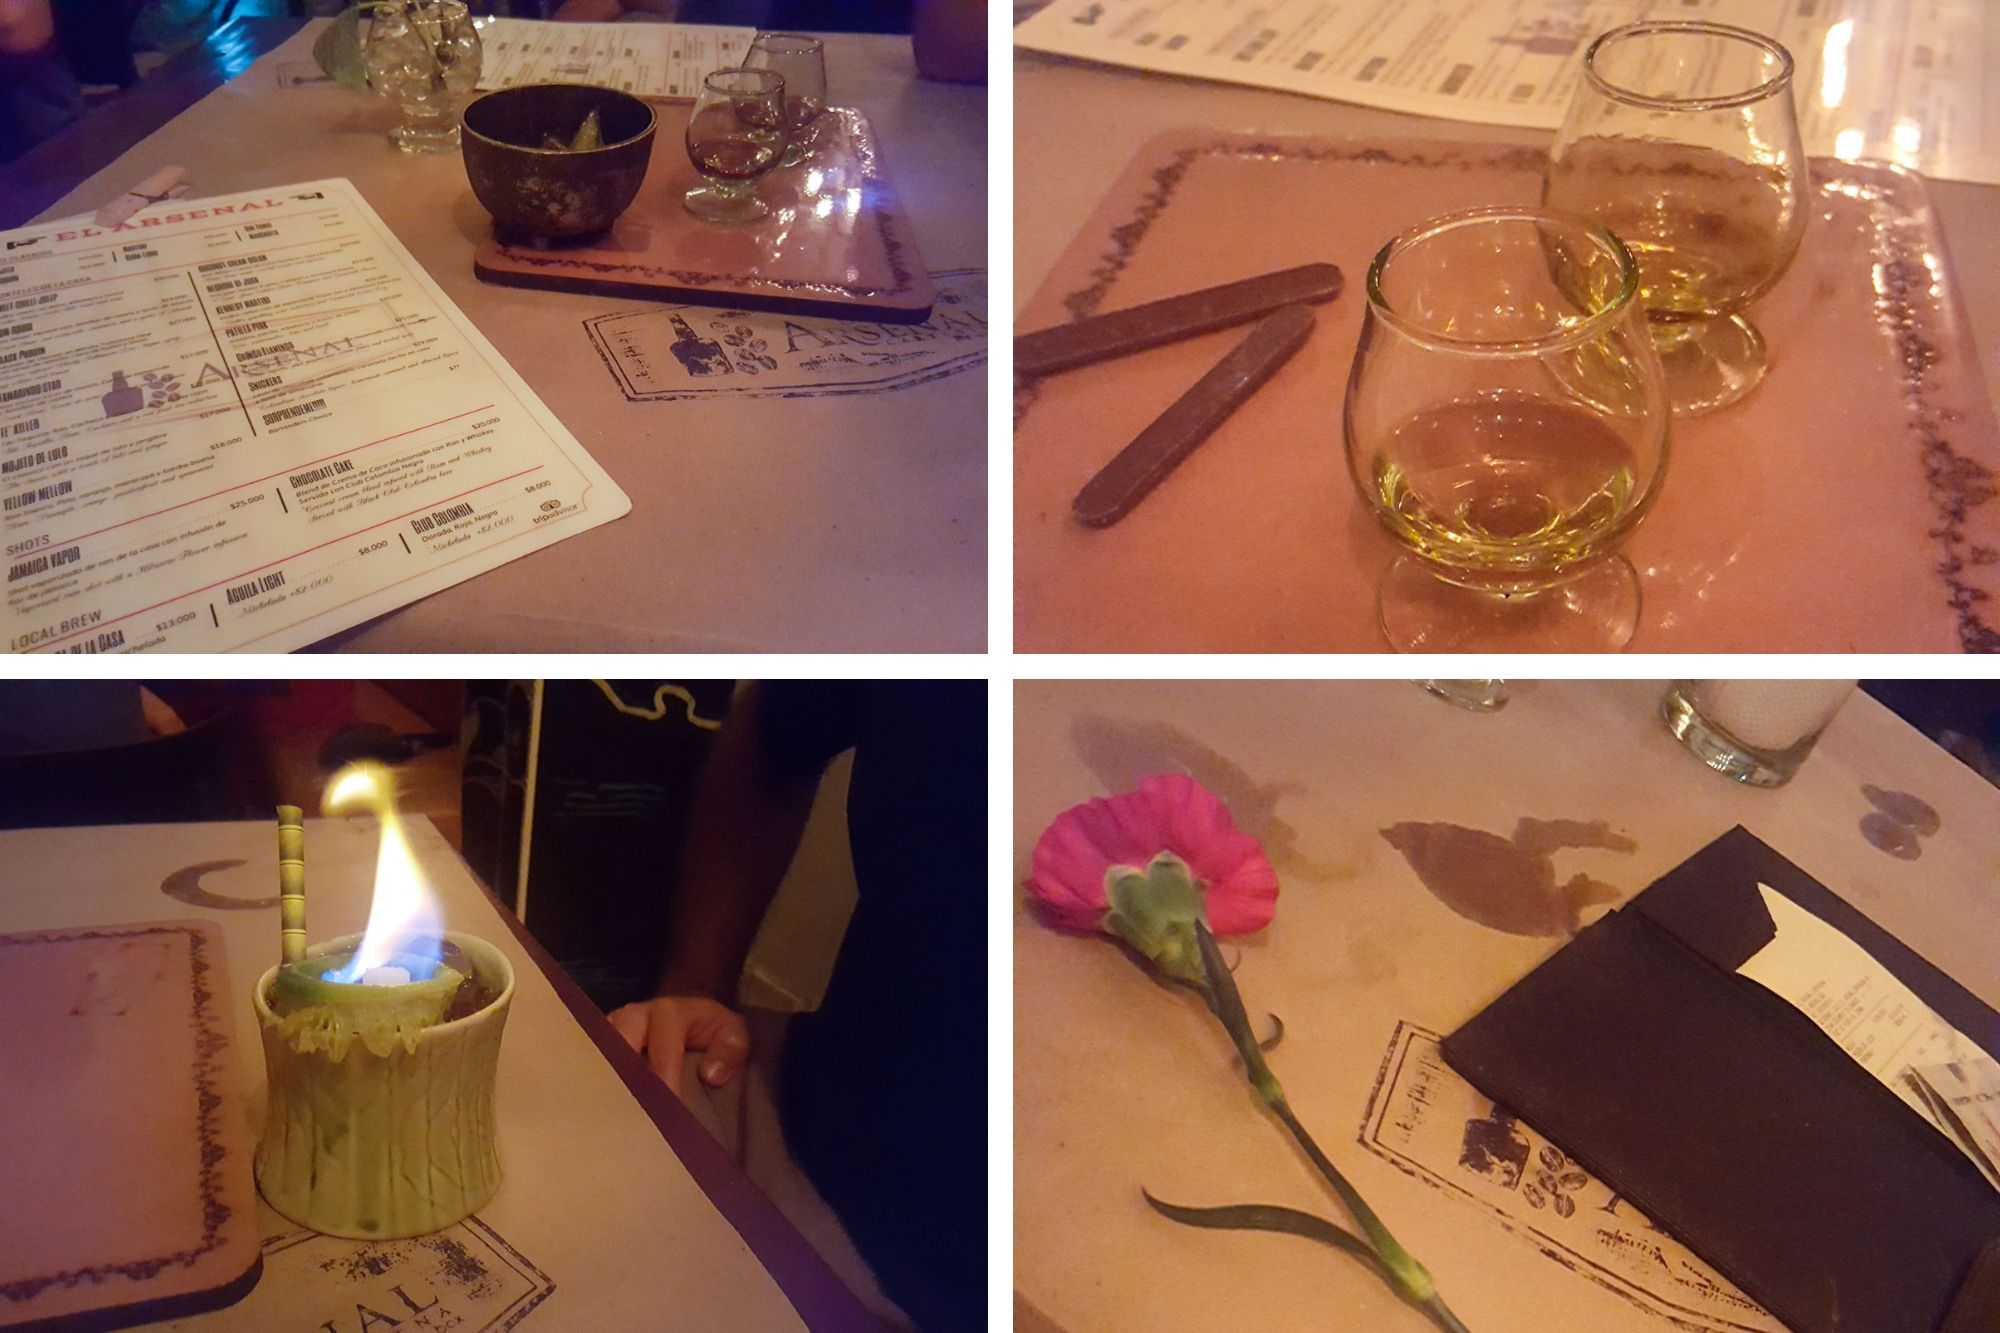 Collage: menu, rum and chocolate, Michael's flaming drink, and a flower with the check